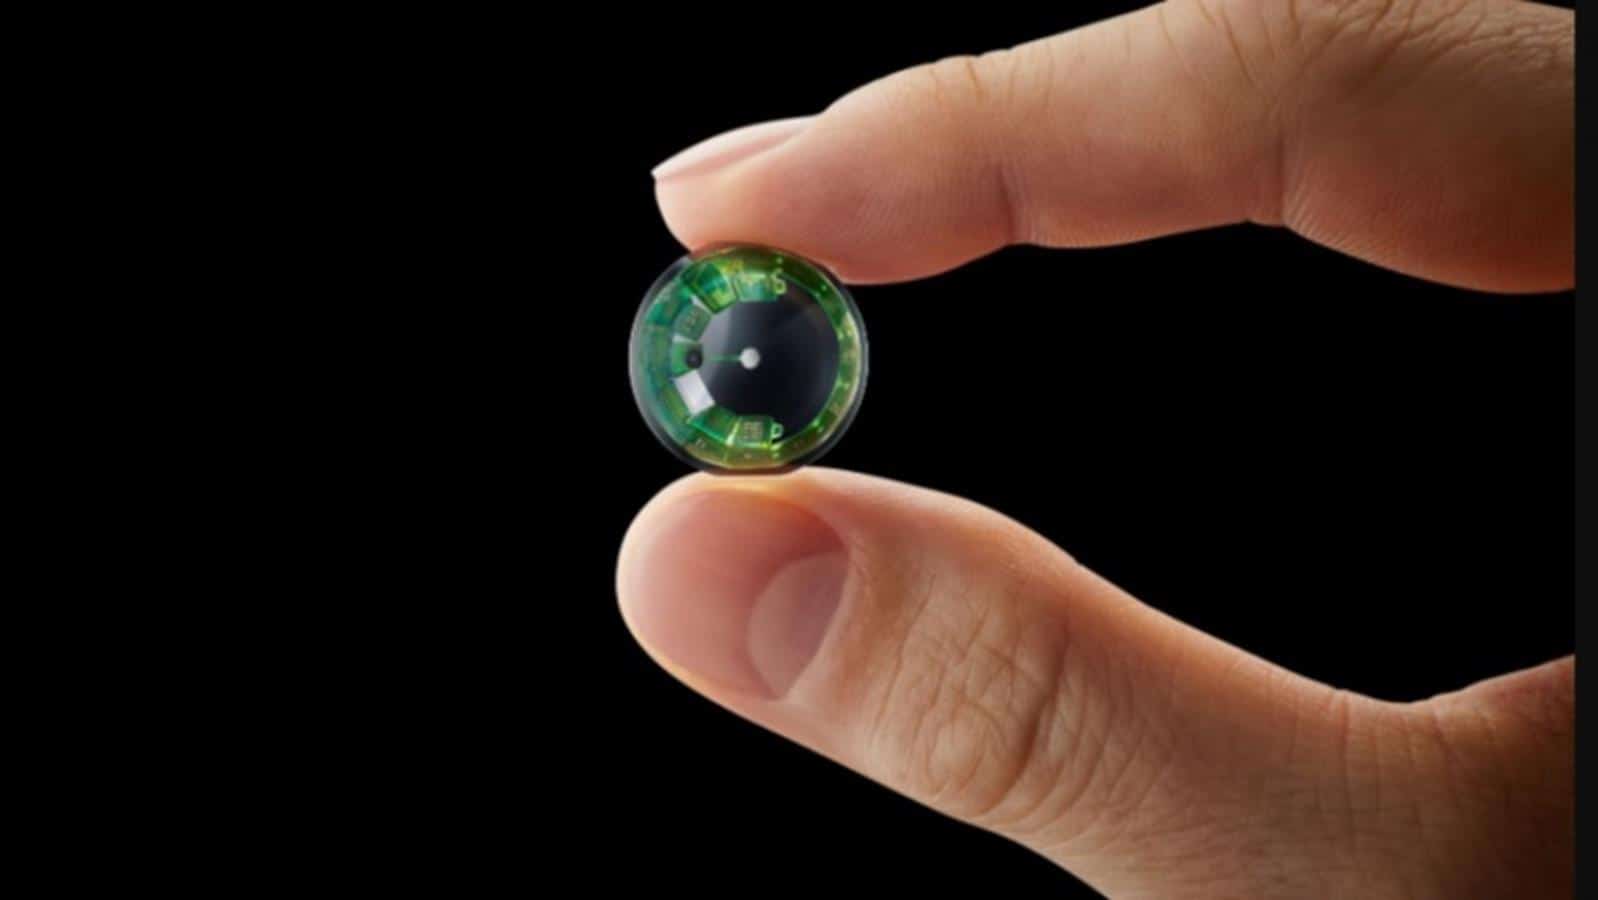 Smart contact lenses with microLED displays and eye tracking function were developed